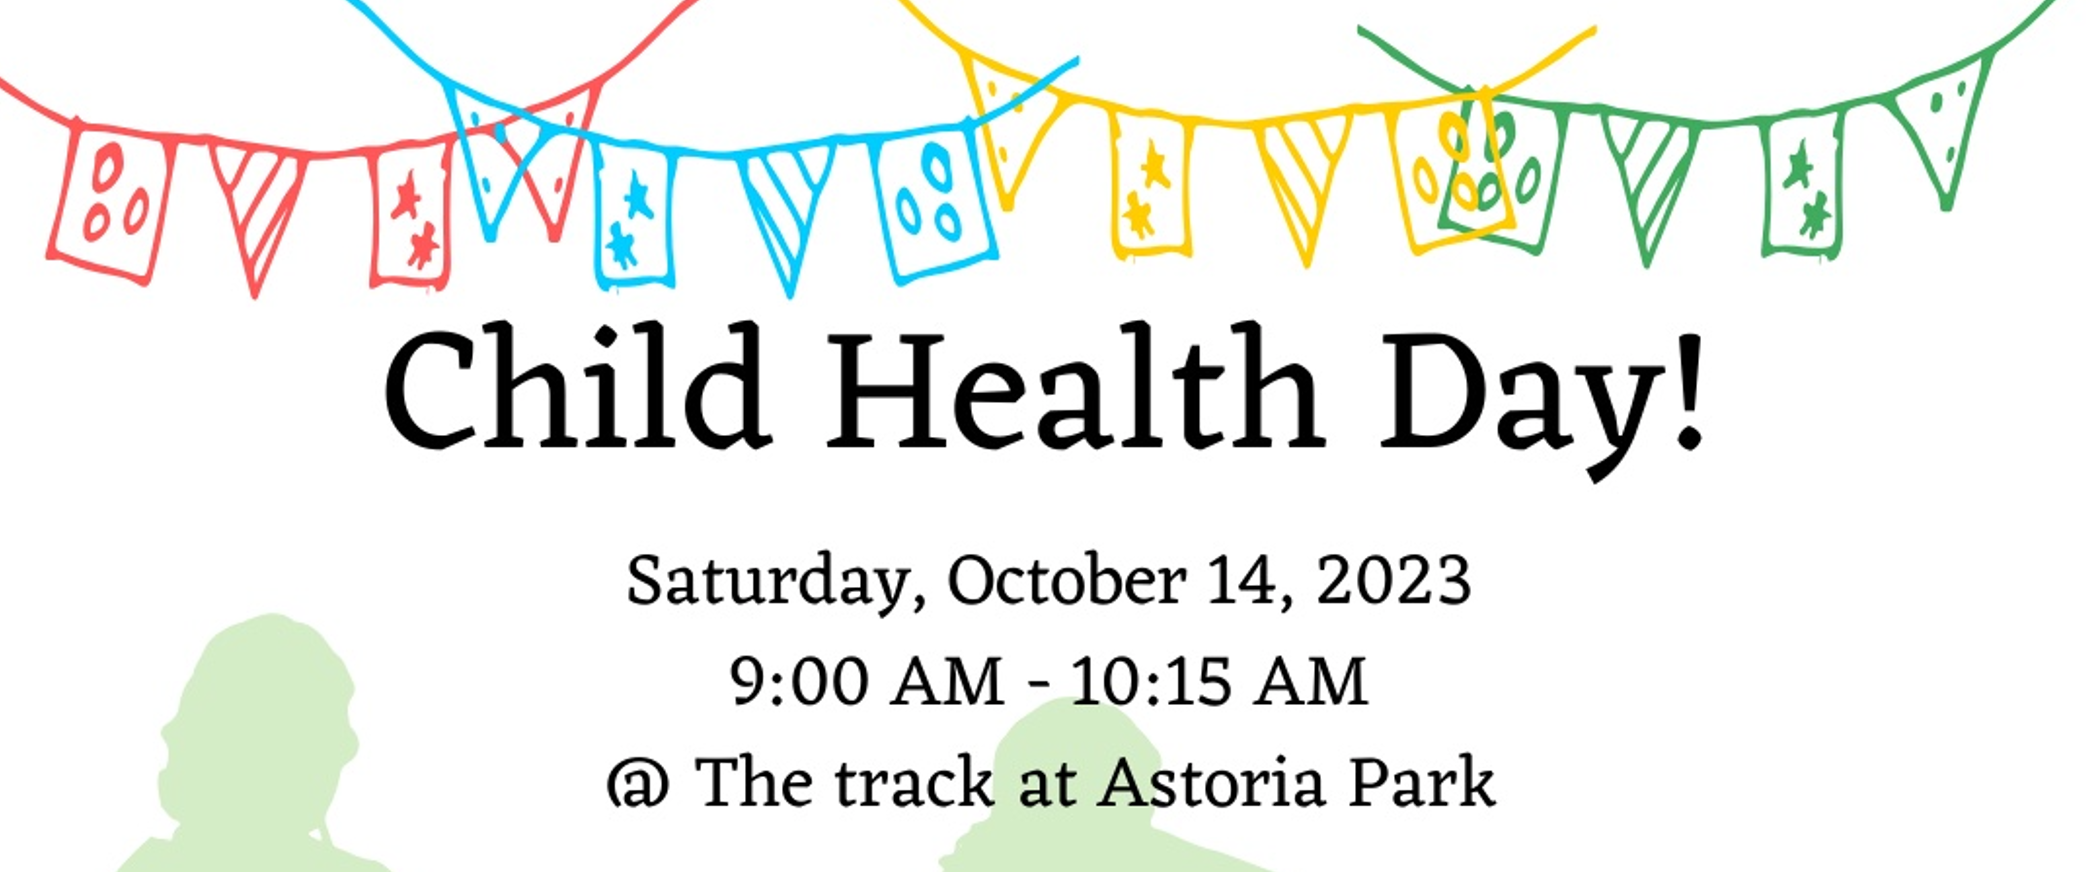 UP-Stand Child Health Event on November 4th